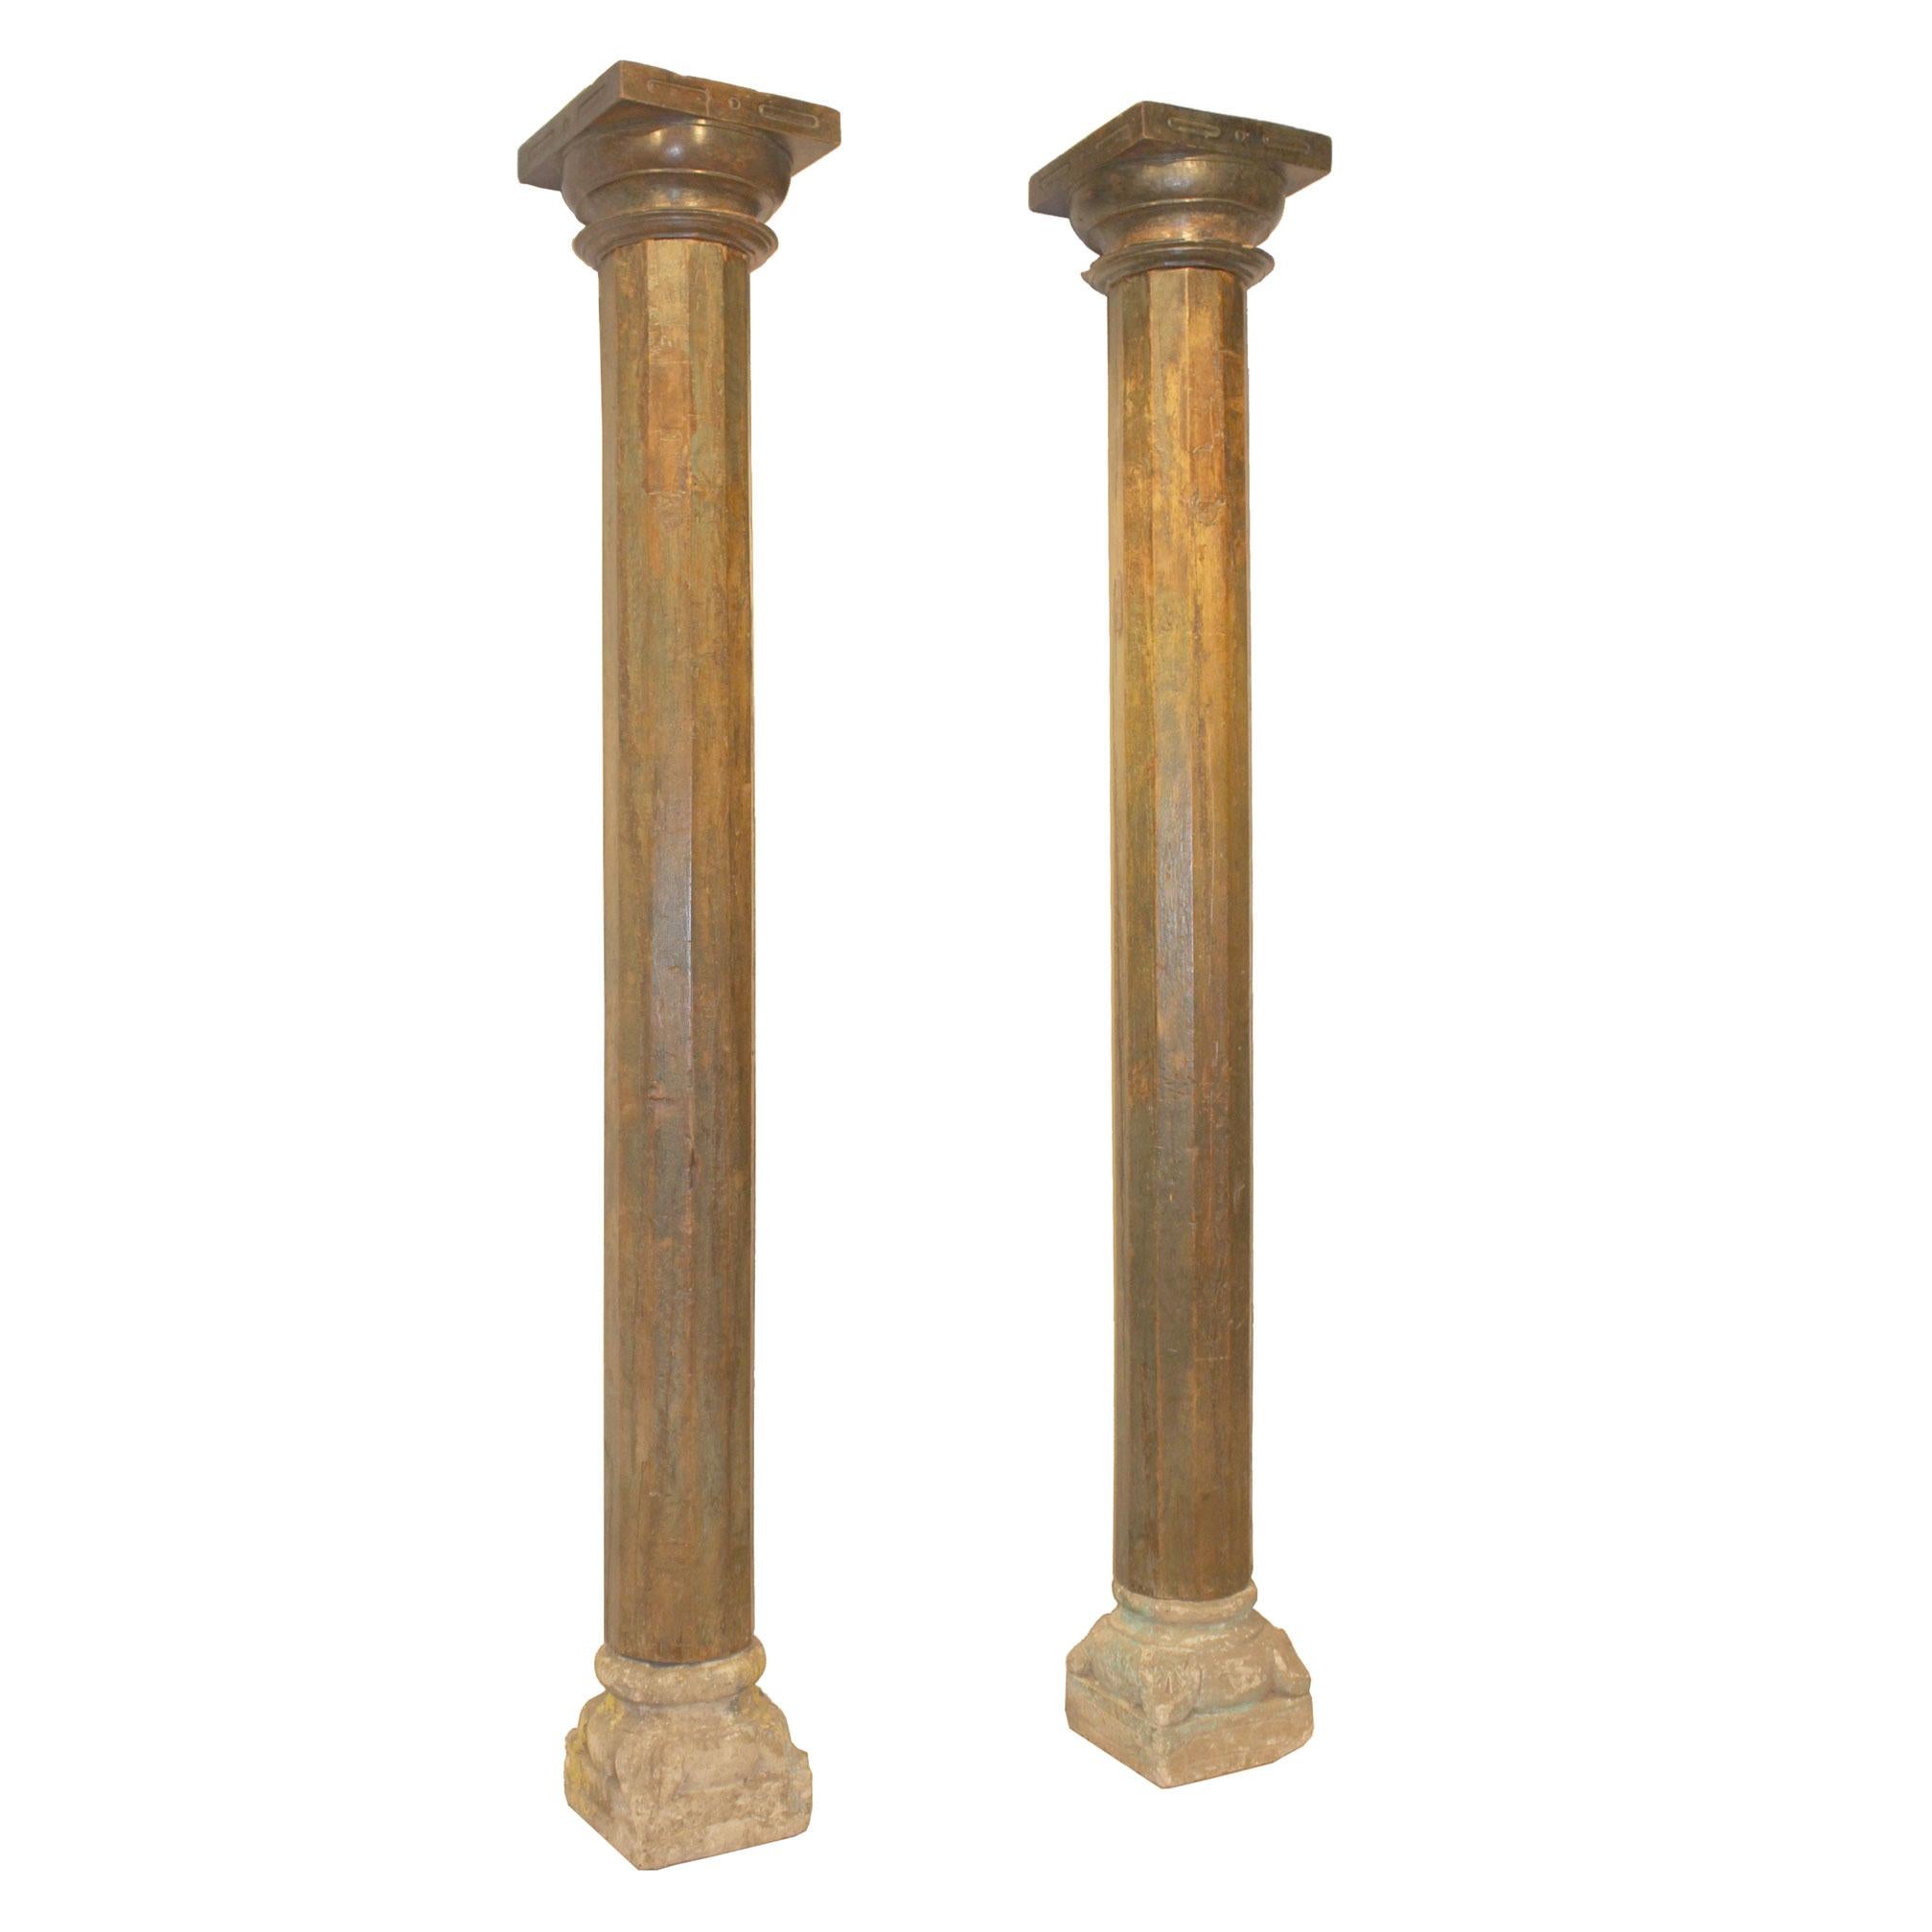 Pair of beautiful wood columns from a Haveli in Gujarat, India. The columns have carved wood capitals and stone bases. Originally used to adorn an entry in a traditional Indian Haveli. Assembly required.